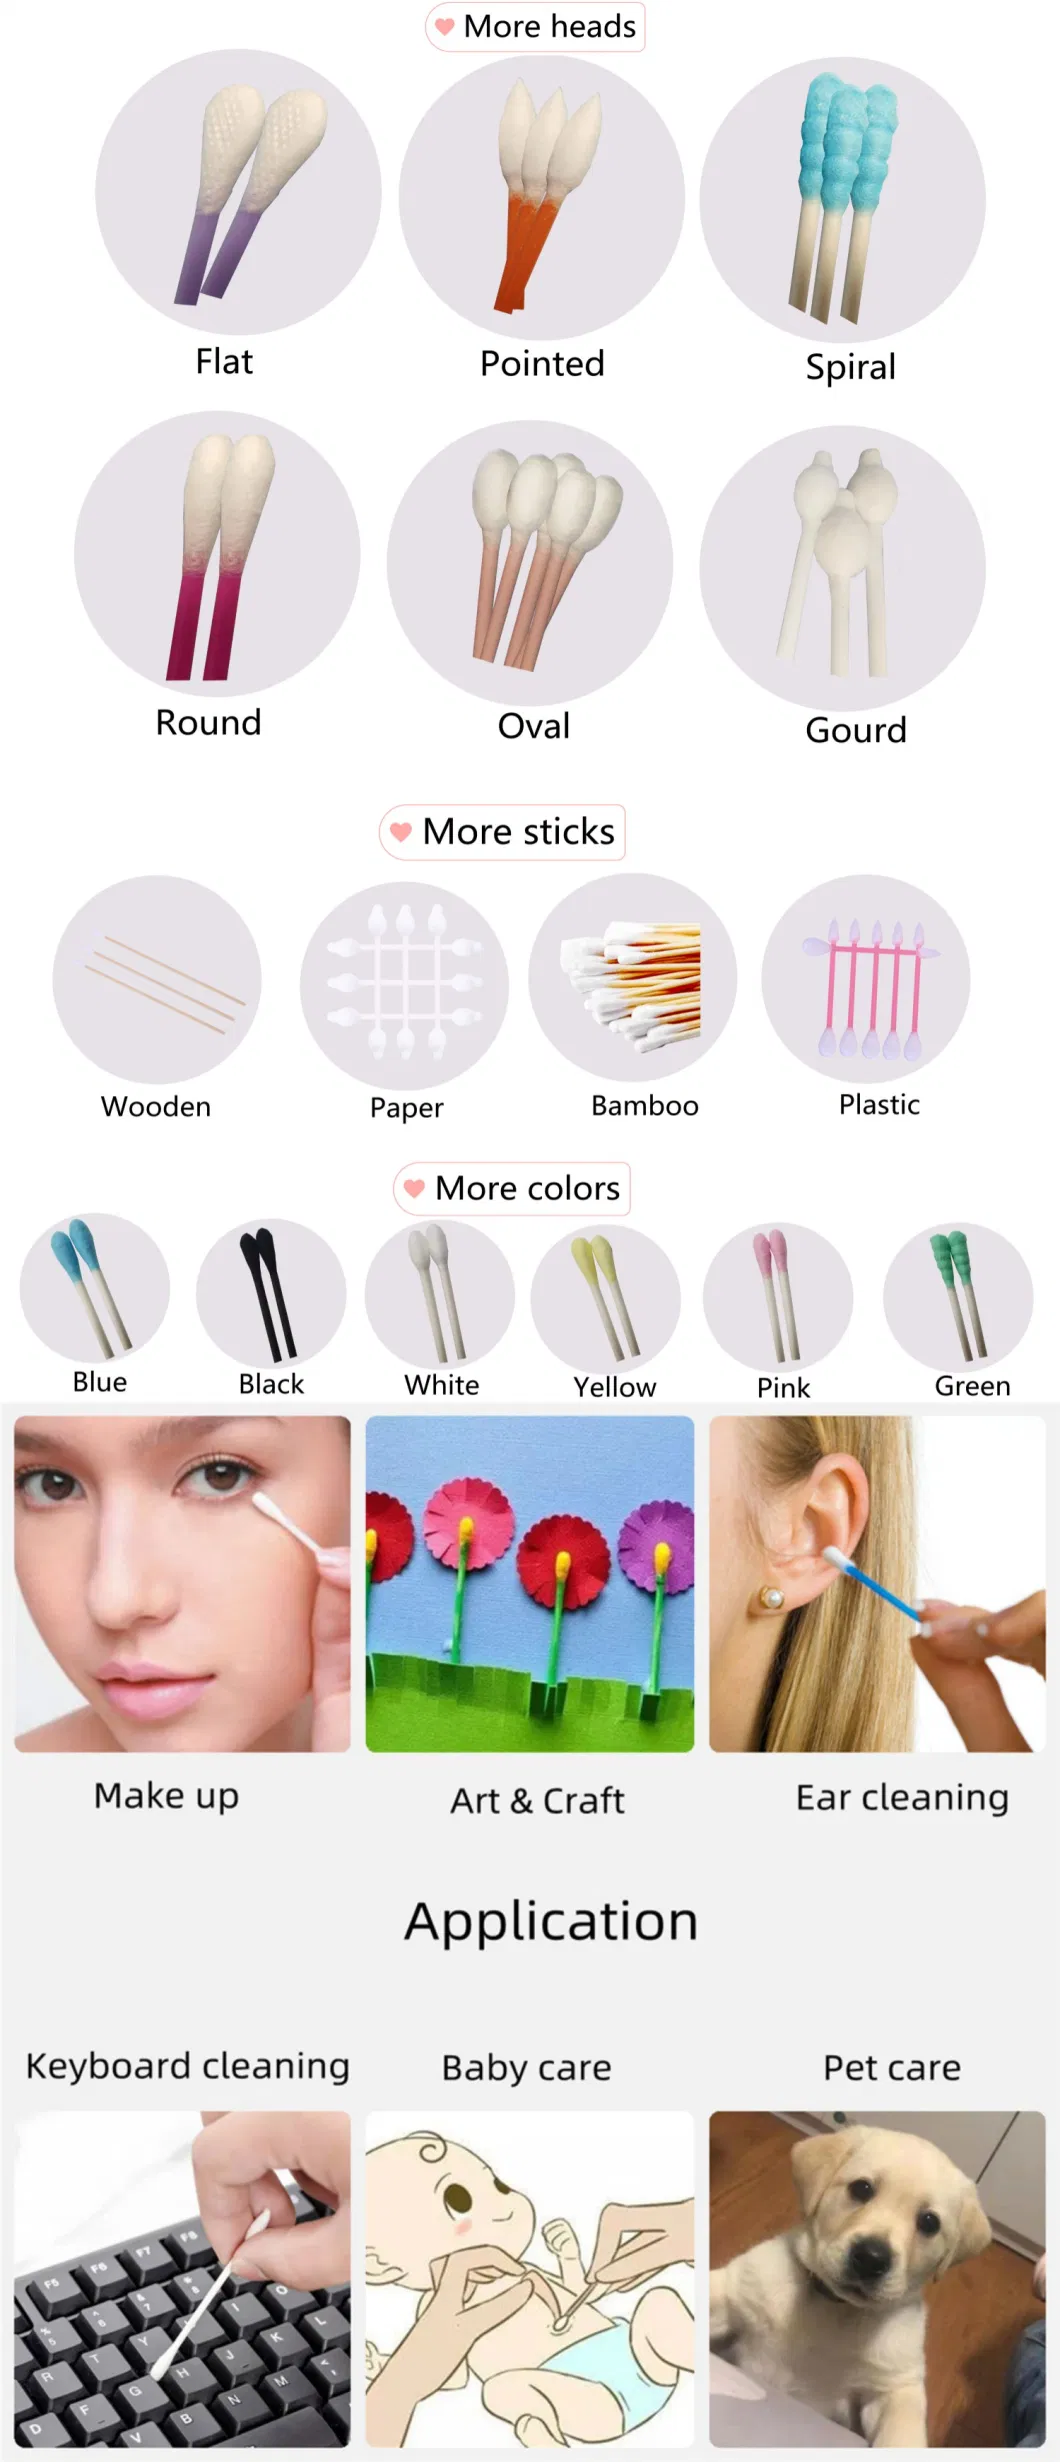 Sample Customization Disposable 3 Inch Plastic Stick Cotton Swab Round Pointed Heads Ear Swabs